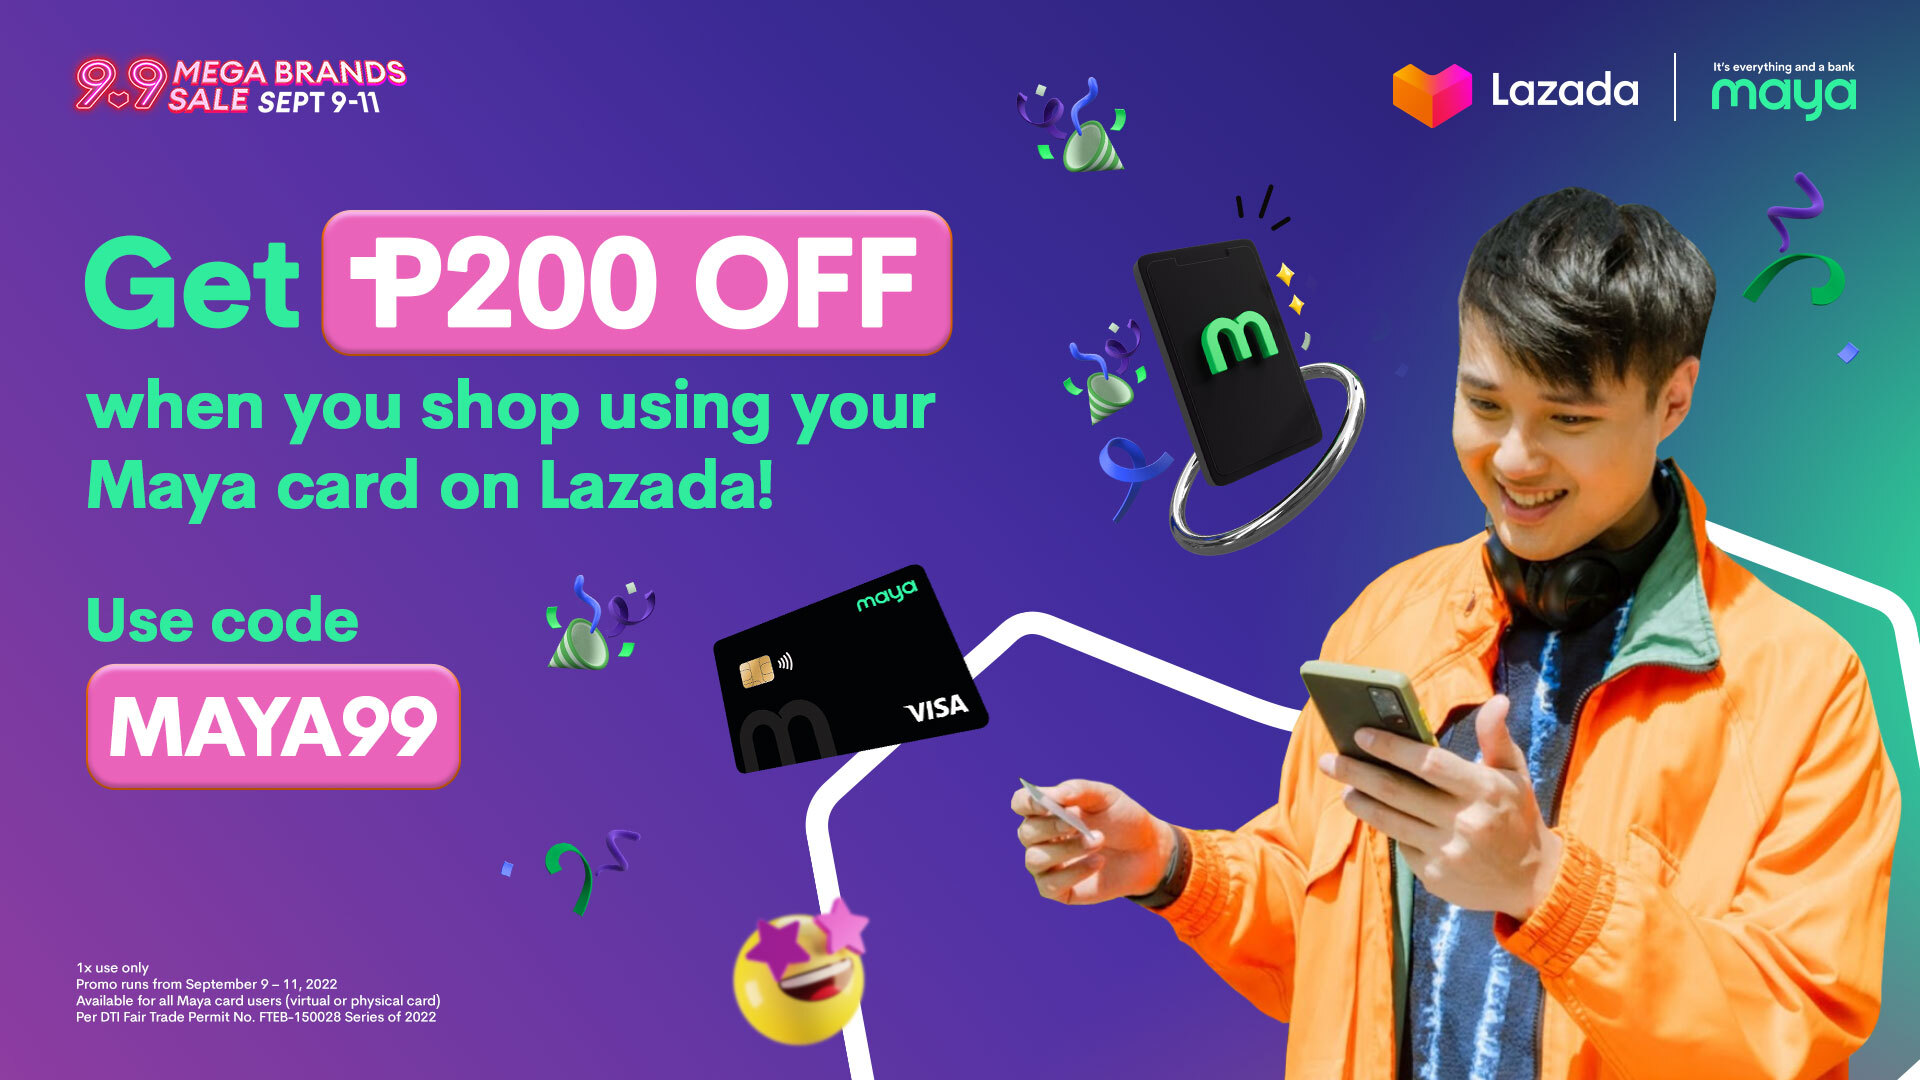 Get P200 OFF when you shop using your Maya Card on Lazada!